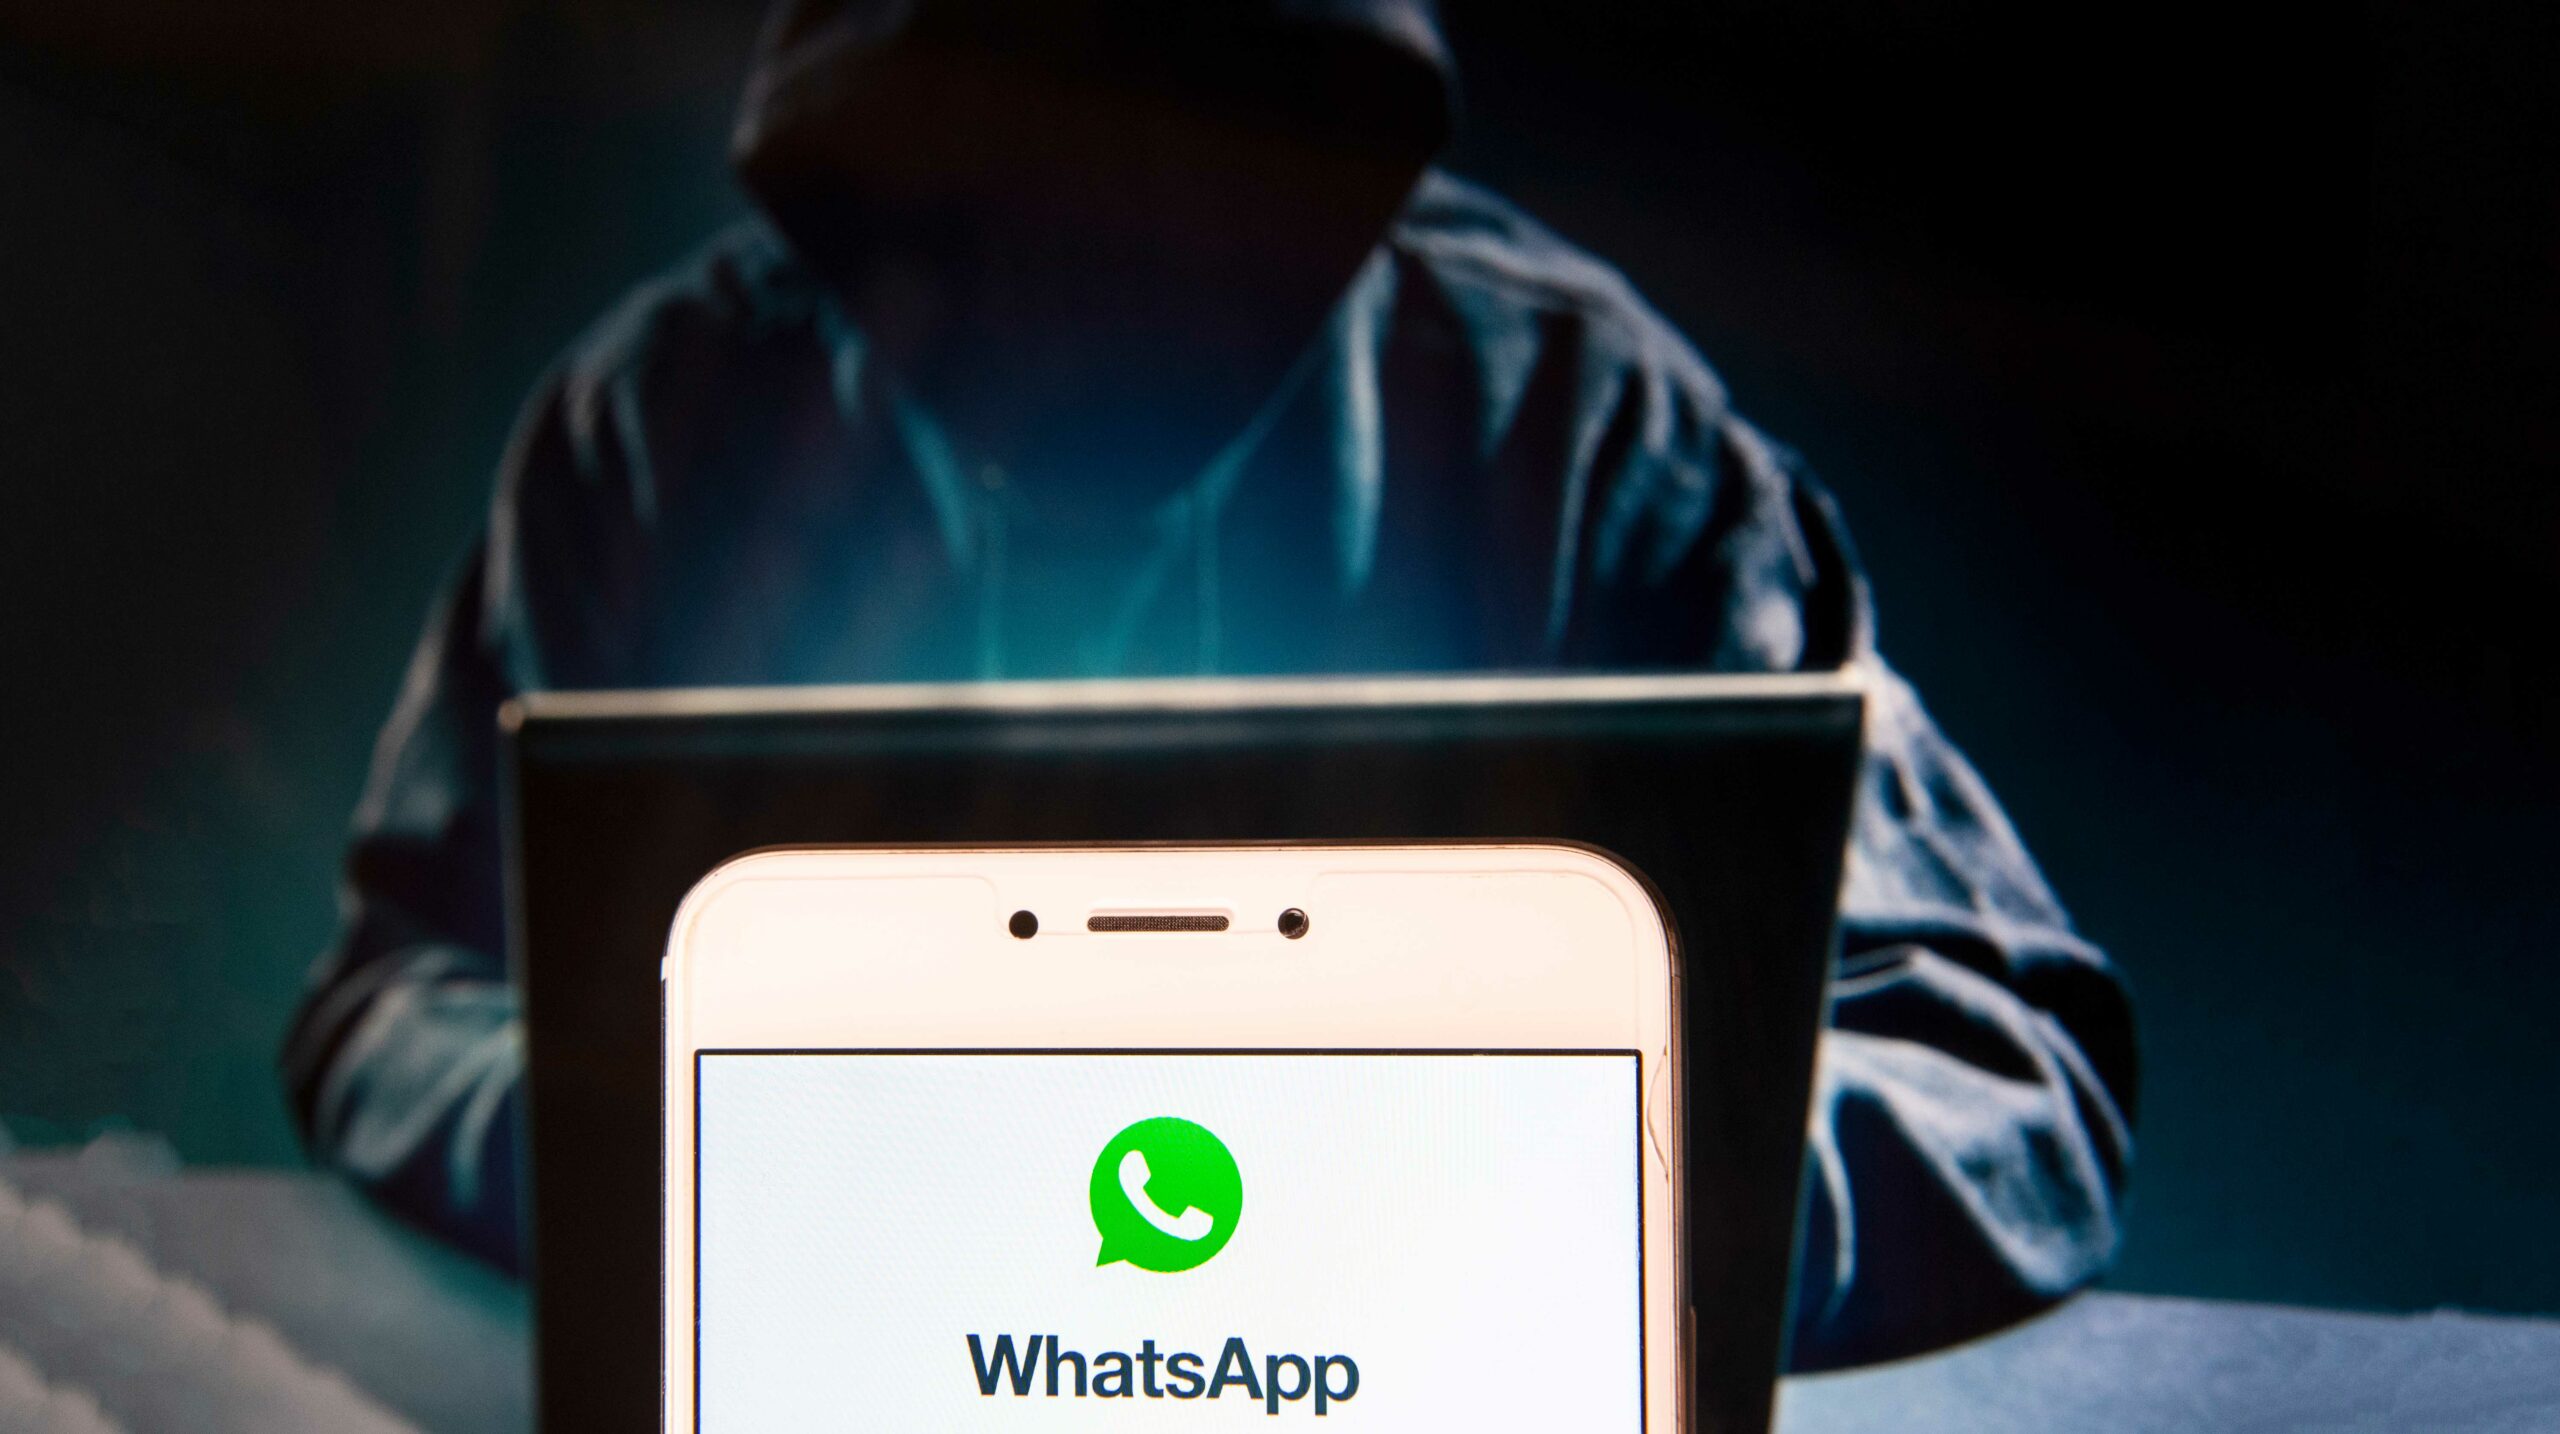 Nearly half a billion compromised WhatsApp numbers up for sale